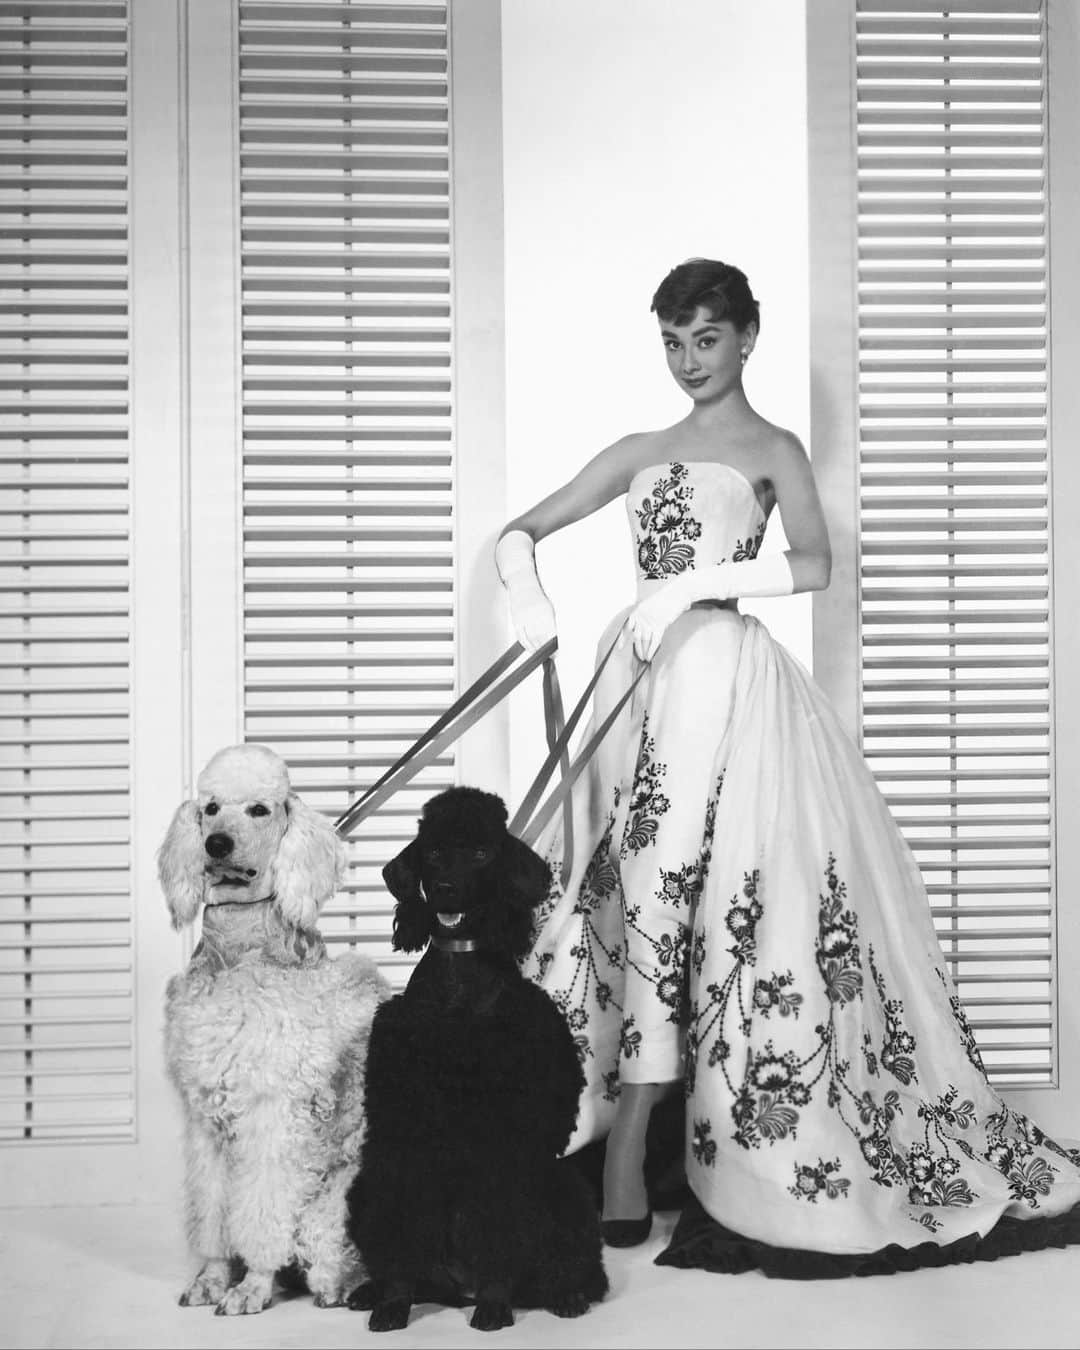 Vogue Runwayのインスタグラム：「Hubert de Givenchy was just 24 when he founded his own maison in 1952 after working on boutique collections for Elsa Schiaparelli. The aristocratic designer’s association with Audrey Hepburn, which has come to define the house, started in 1953. Now, making all things archival Givenchy from way back when to today imminently more accessible is the latest book in Thames & Hudson’s "Catwalk Collections." The tome is co-authored by curator Alexandre Samson and journalist and Vogue contributor Anders Christian Madsen, who tackled the collections from 1952 to 2000 and 2001 to now, respectively. Tap the link in bio for a look inside the book, and discover the co-authors' favorite collections.」